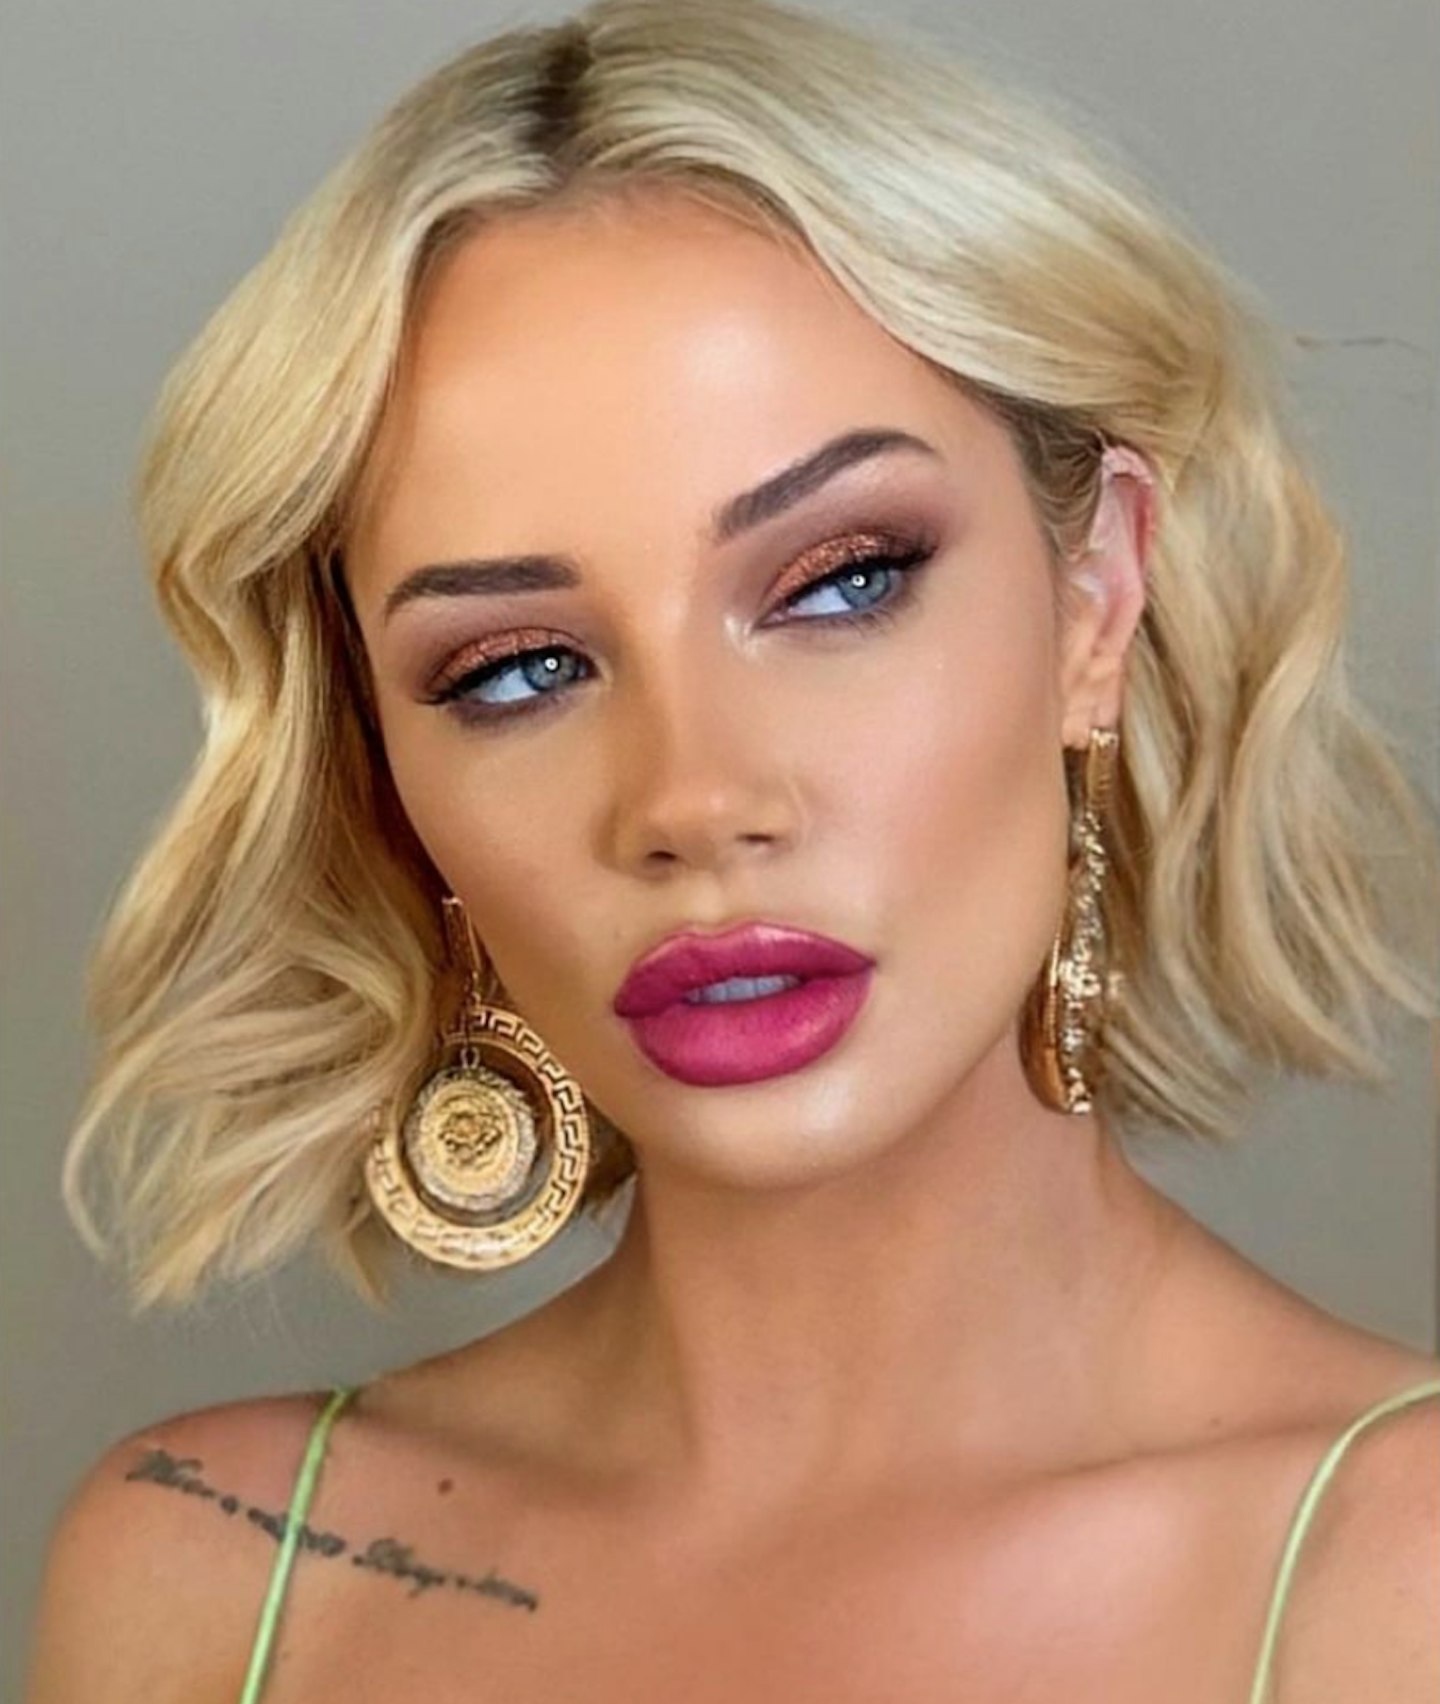 Jessika Power sports a full-glam look for instagram